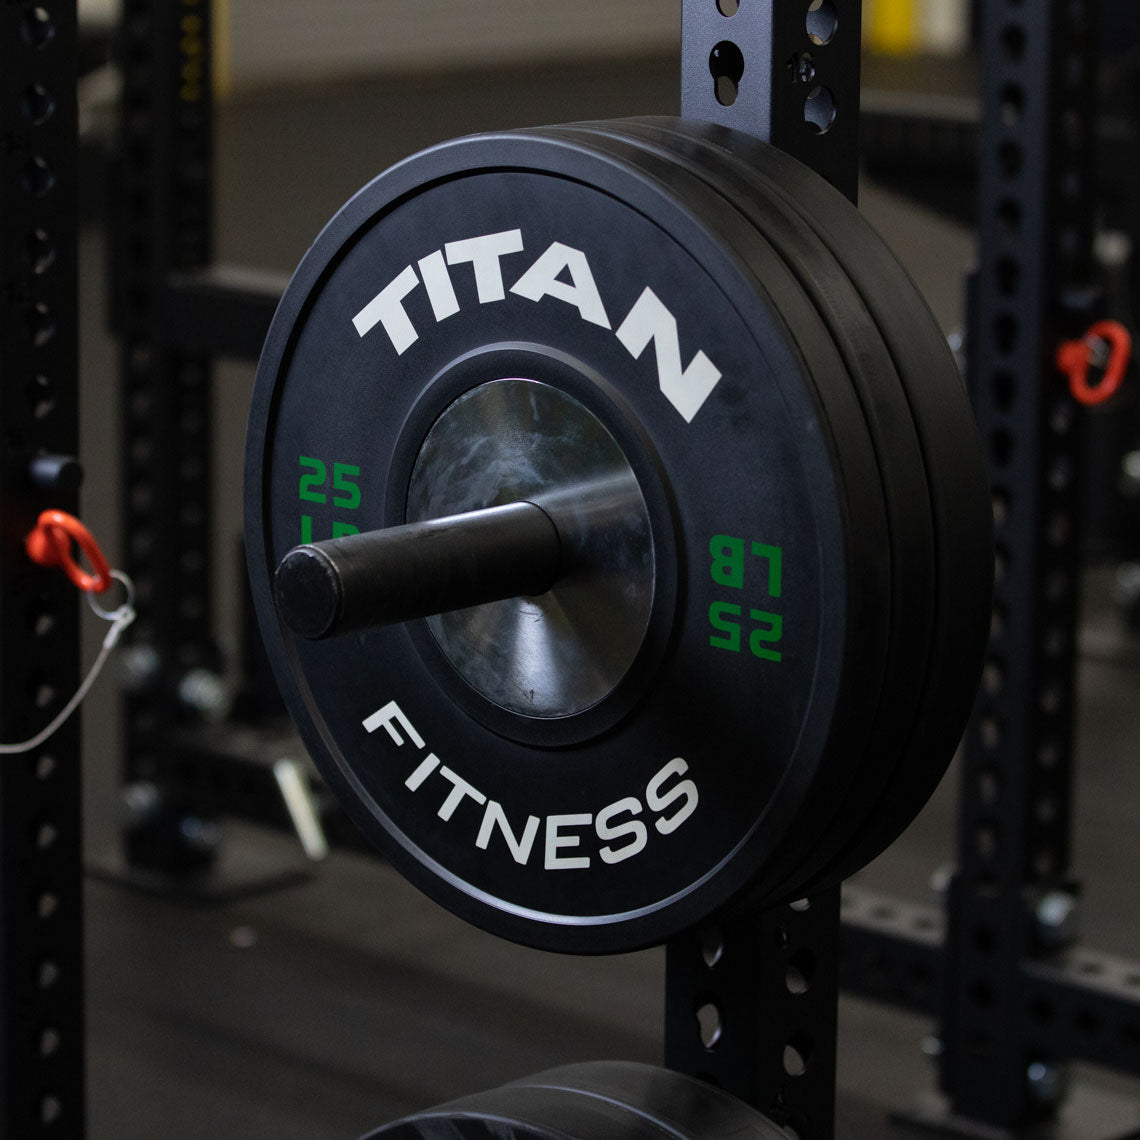 TITAN Series Weight Plate Holders - 50mm sleeve diameter fits Olympic weight plates